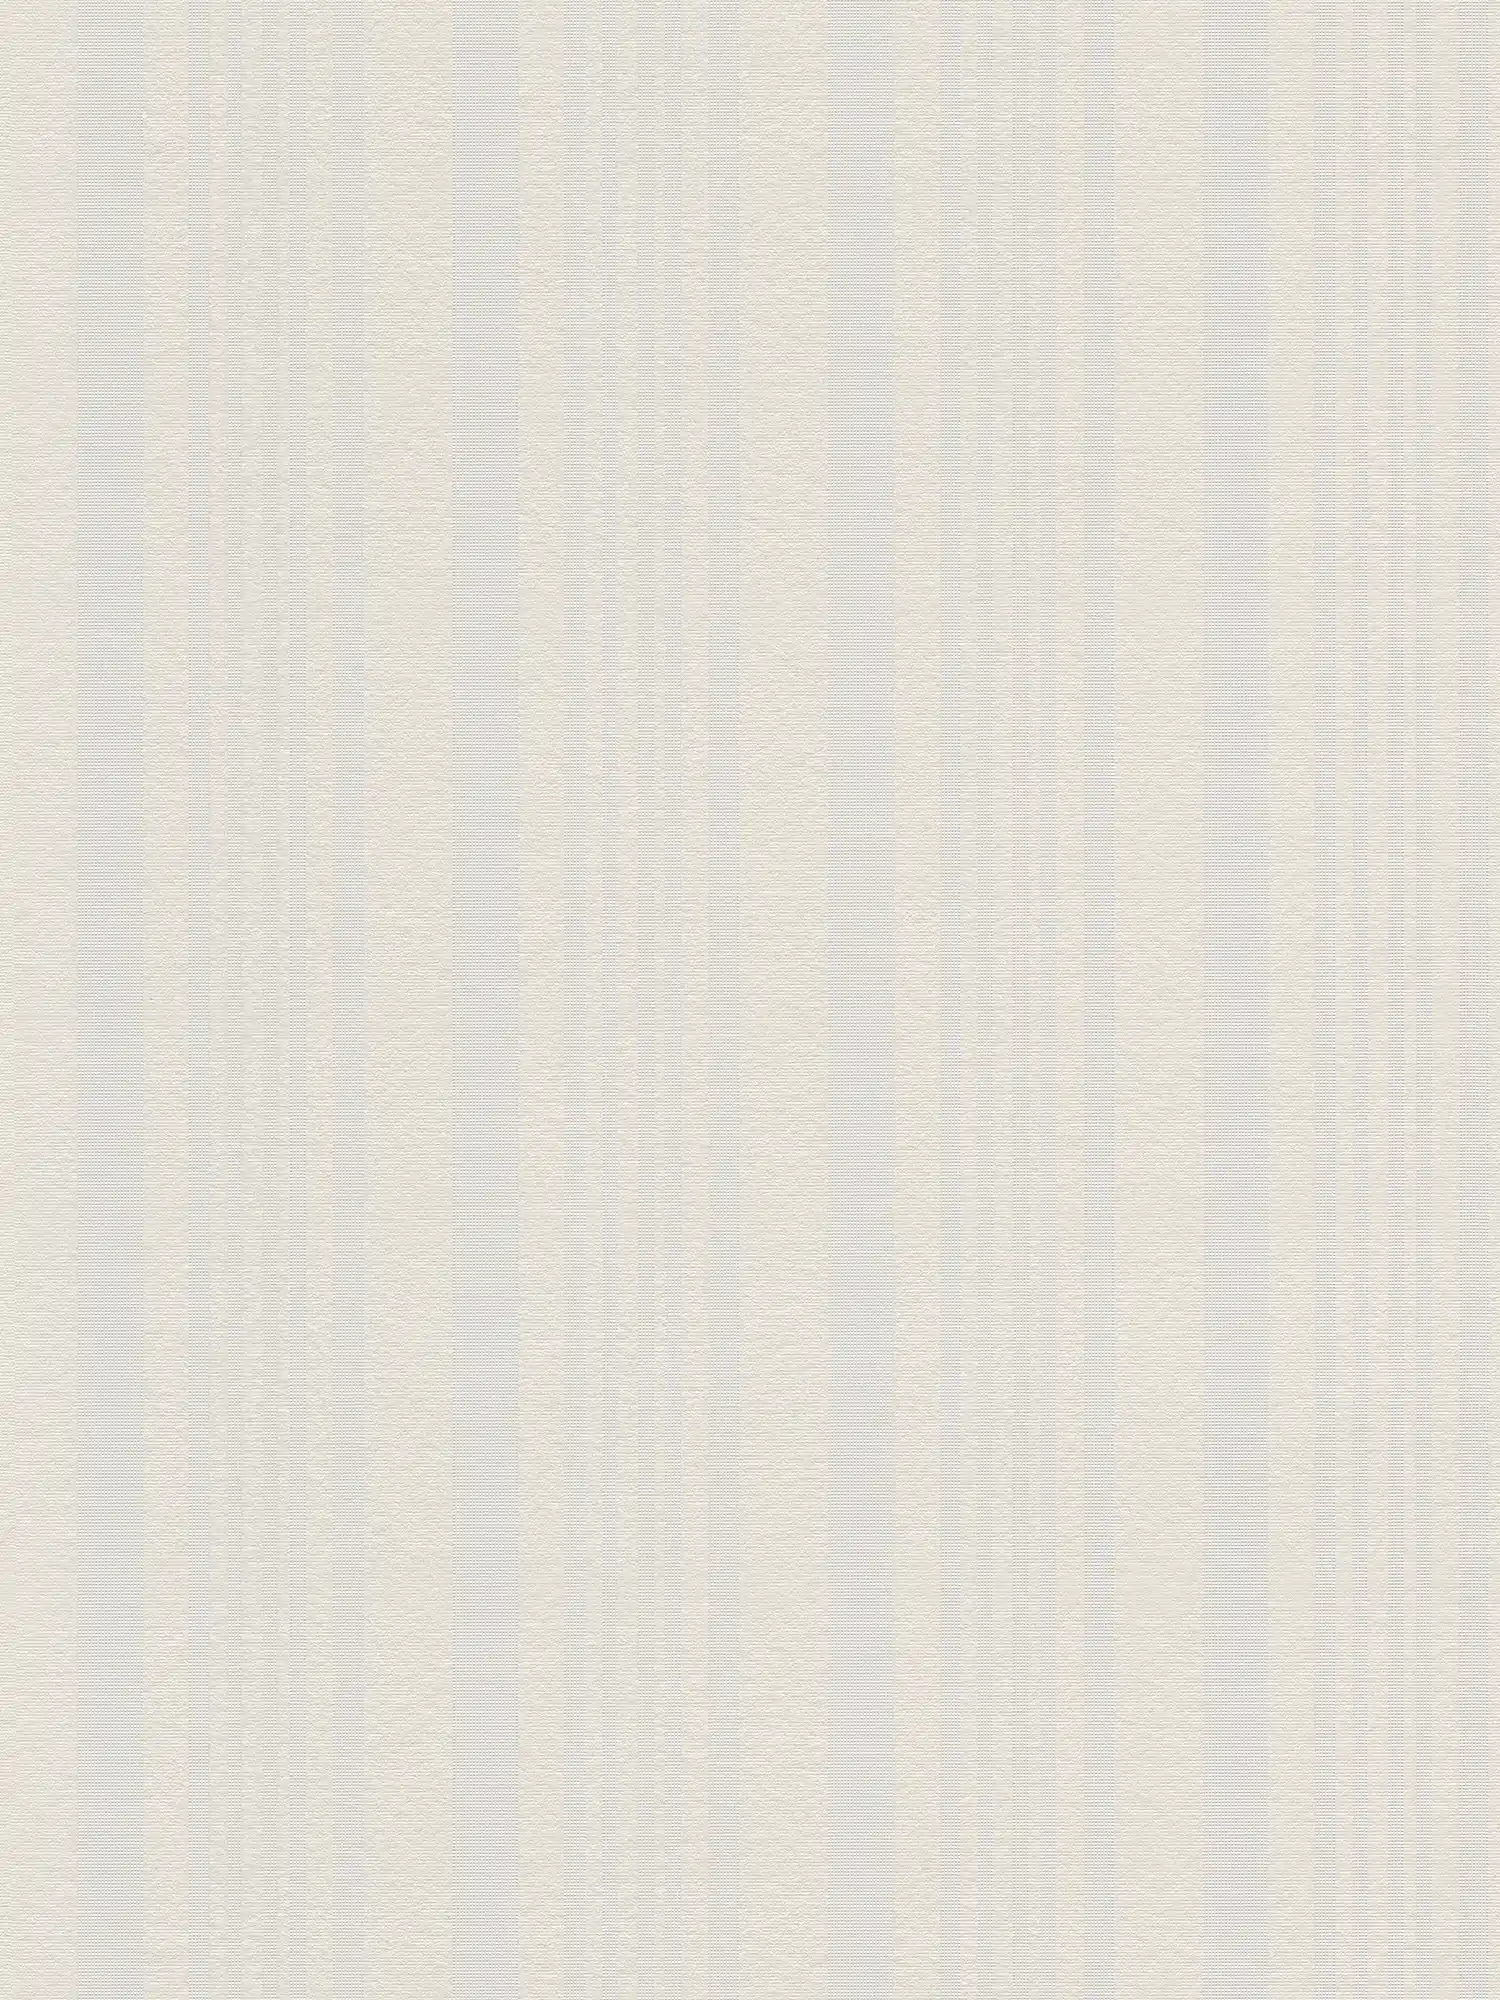 Striped wallpaper to paint over - white
